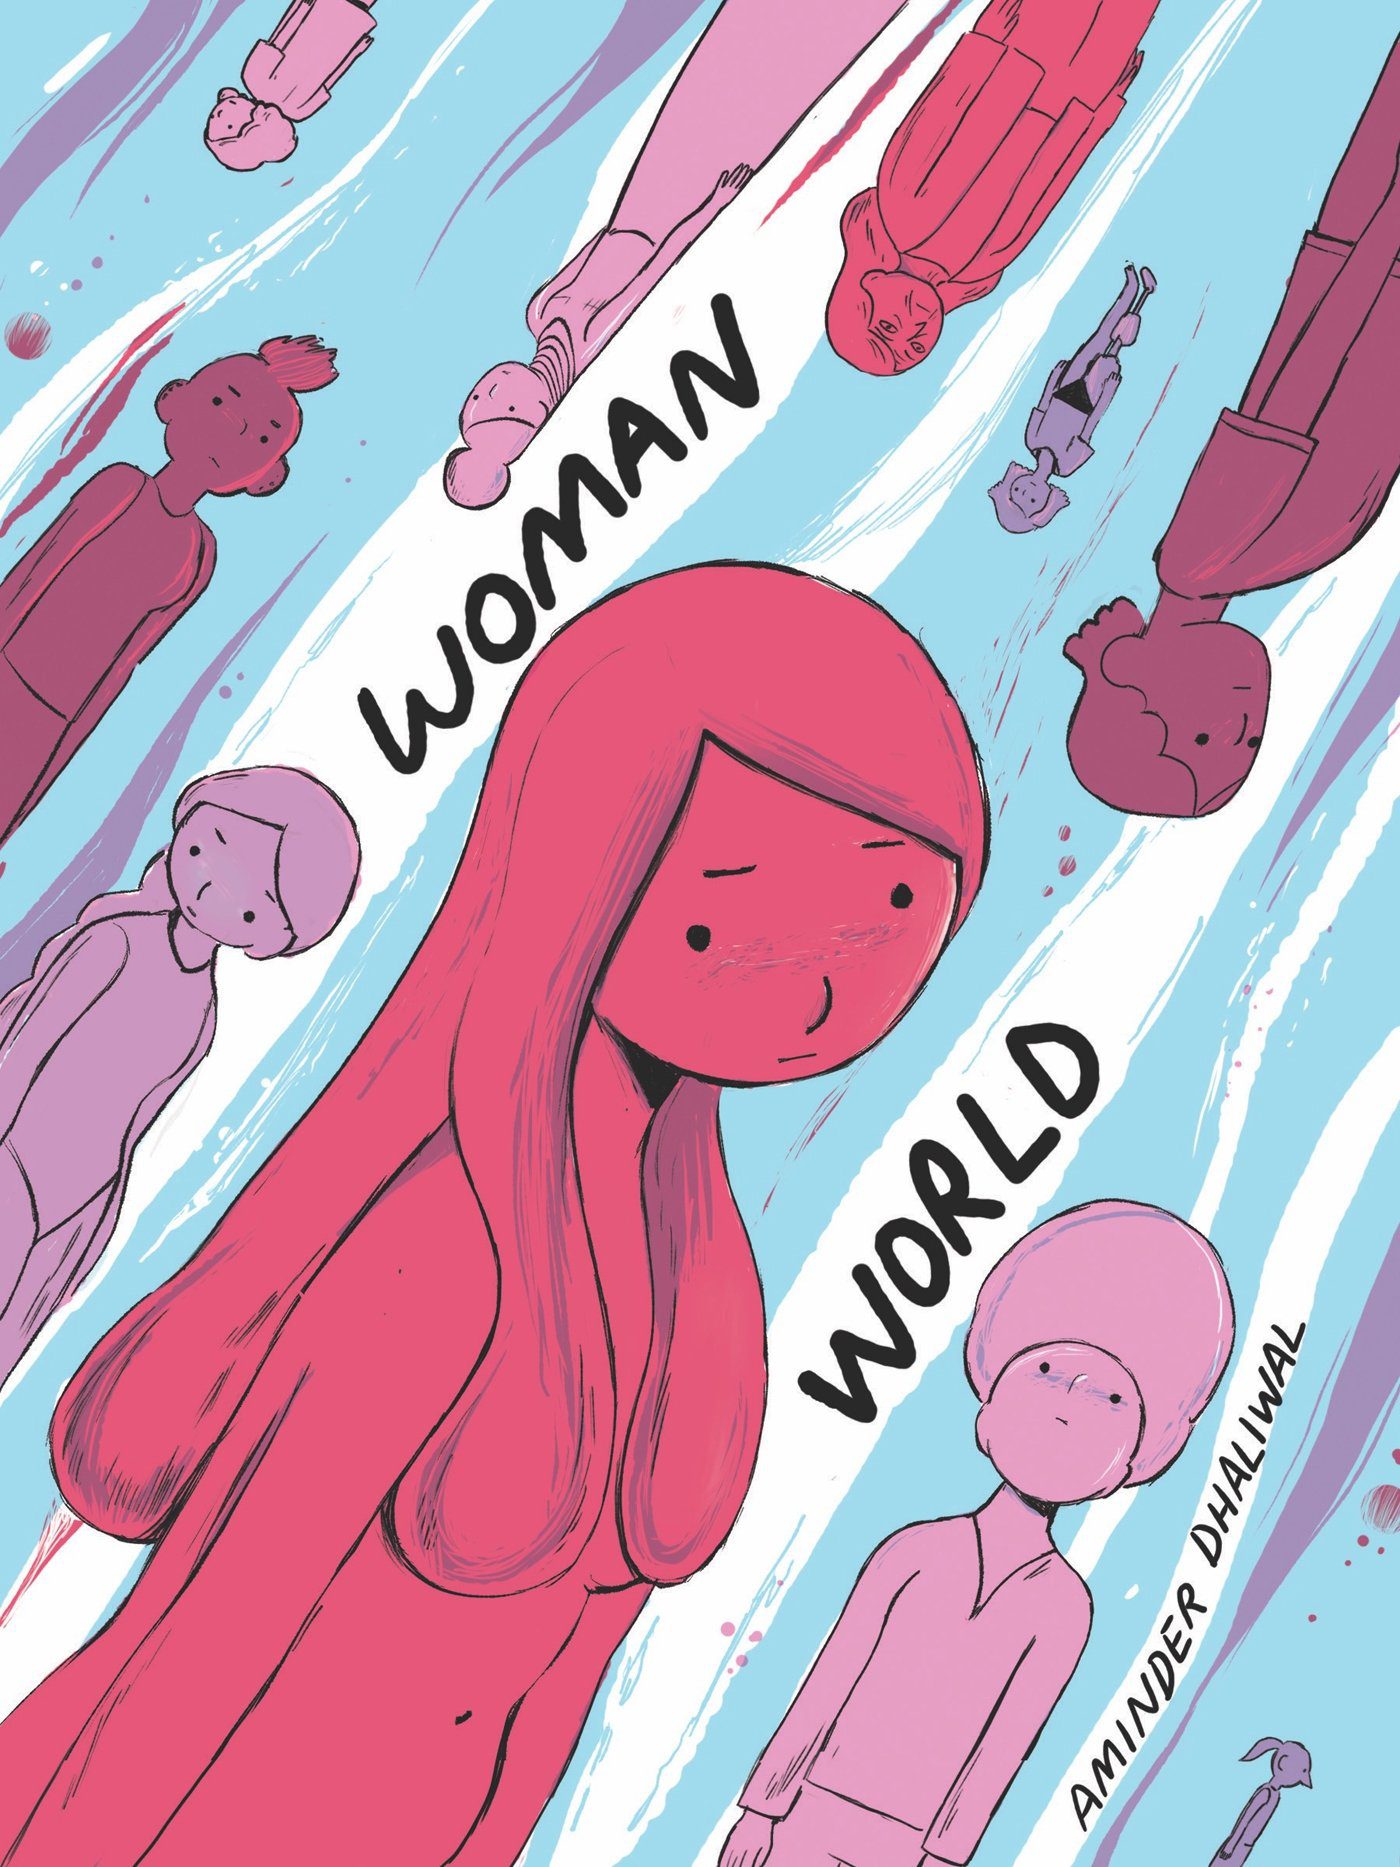 Woman World book cover